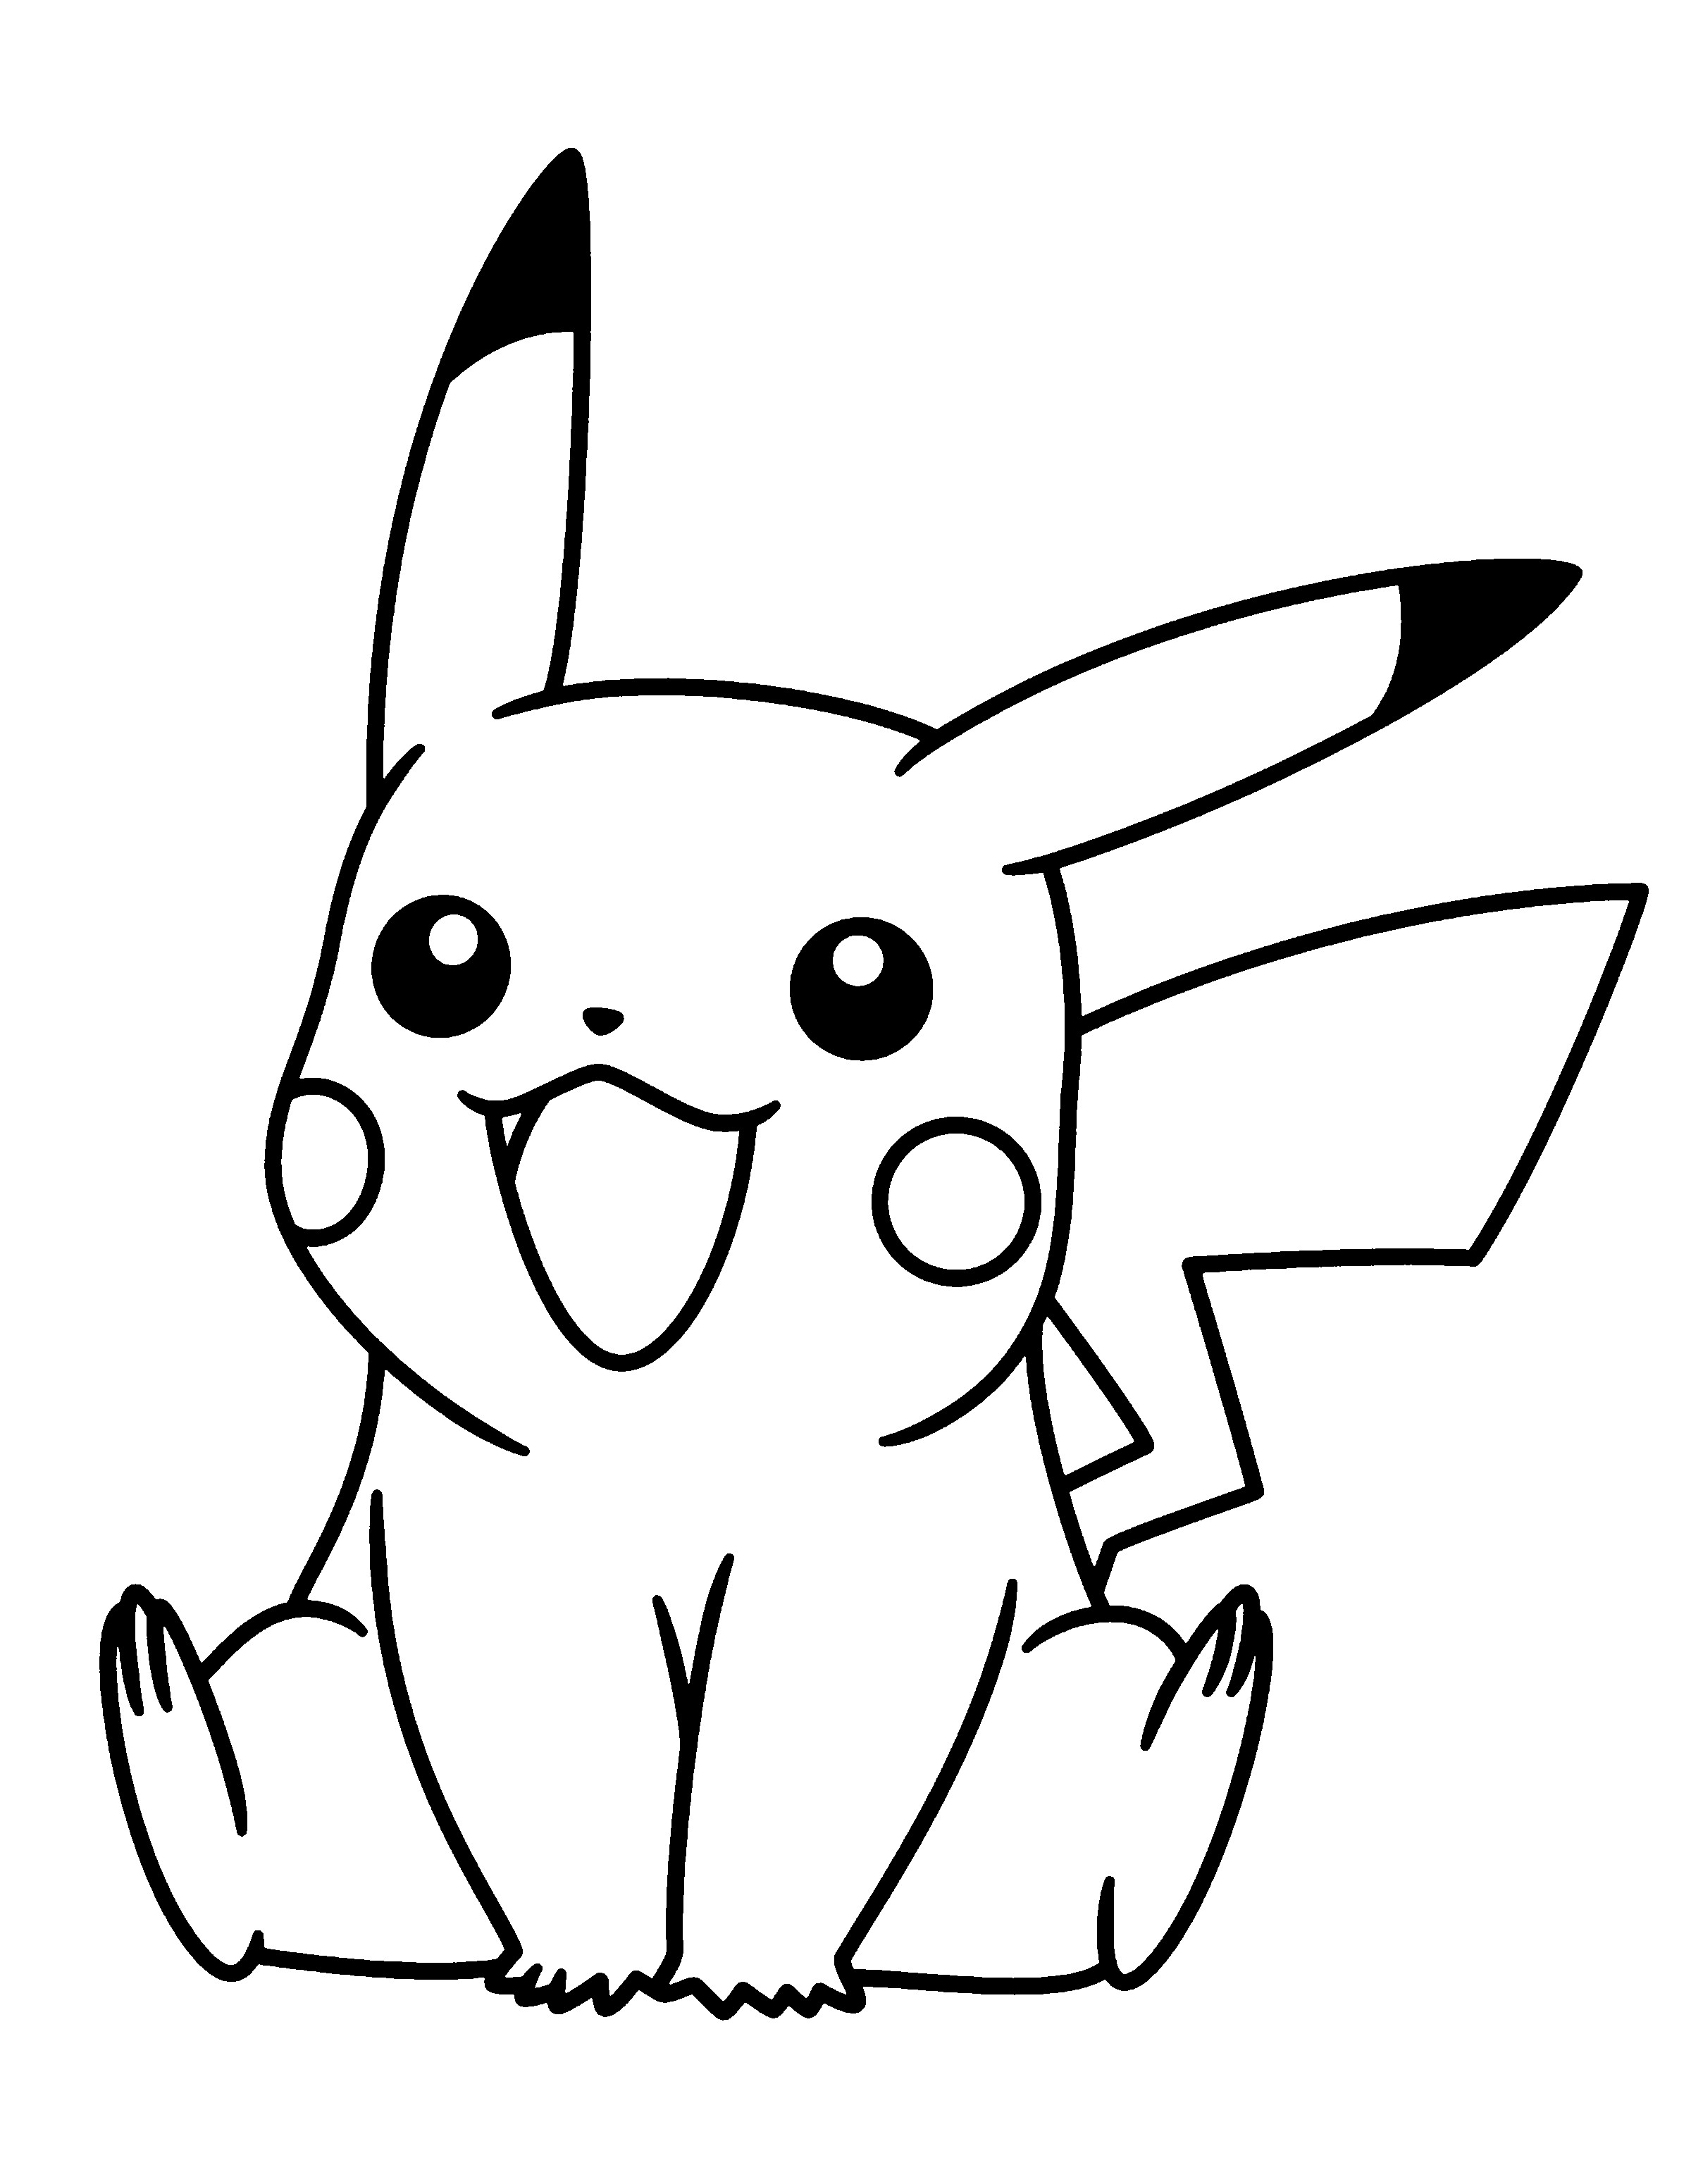 Eevee and Pikachu Coloring Pages